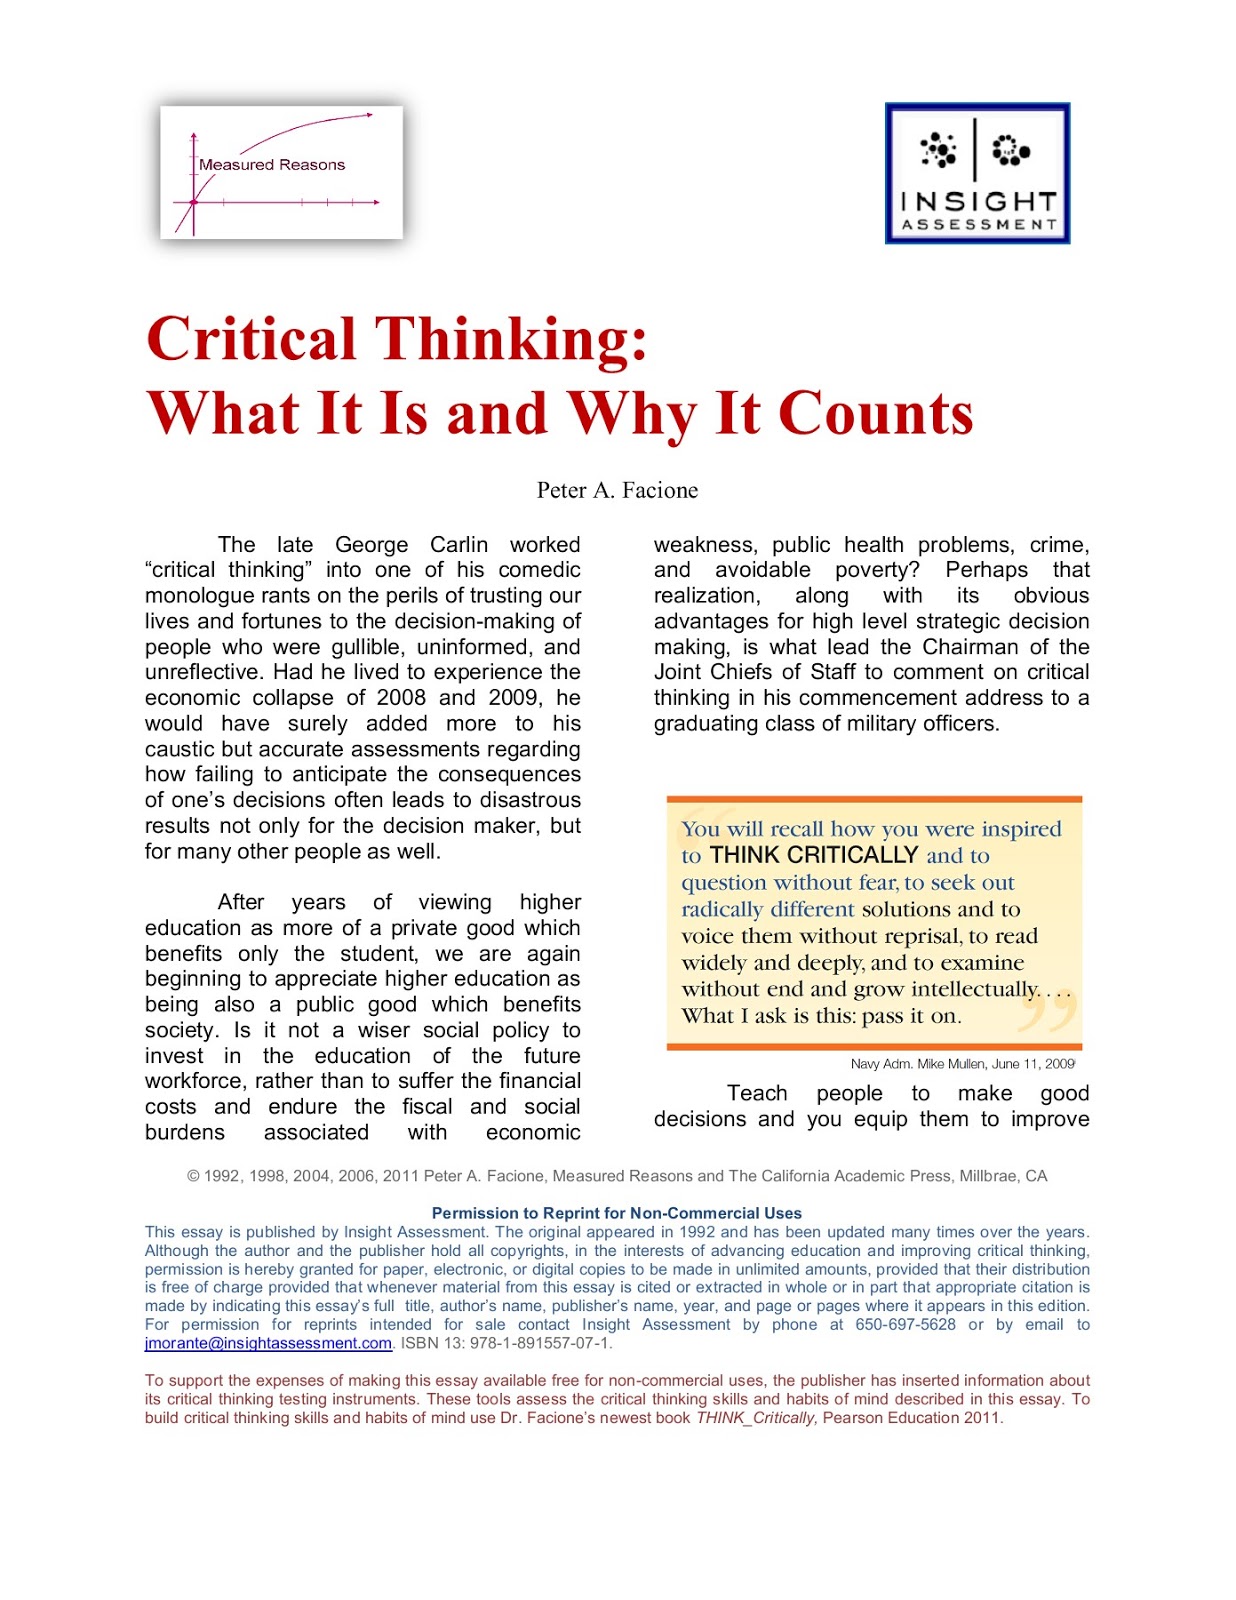 example of critical thinking essay